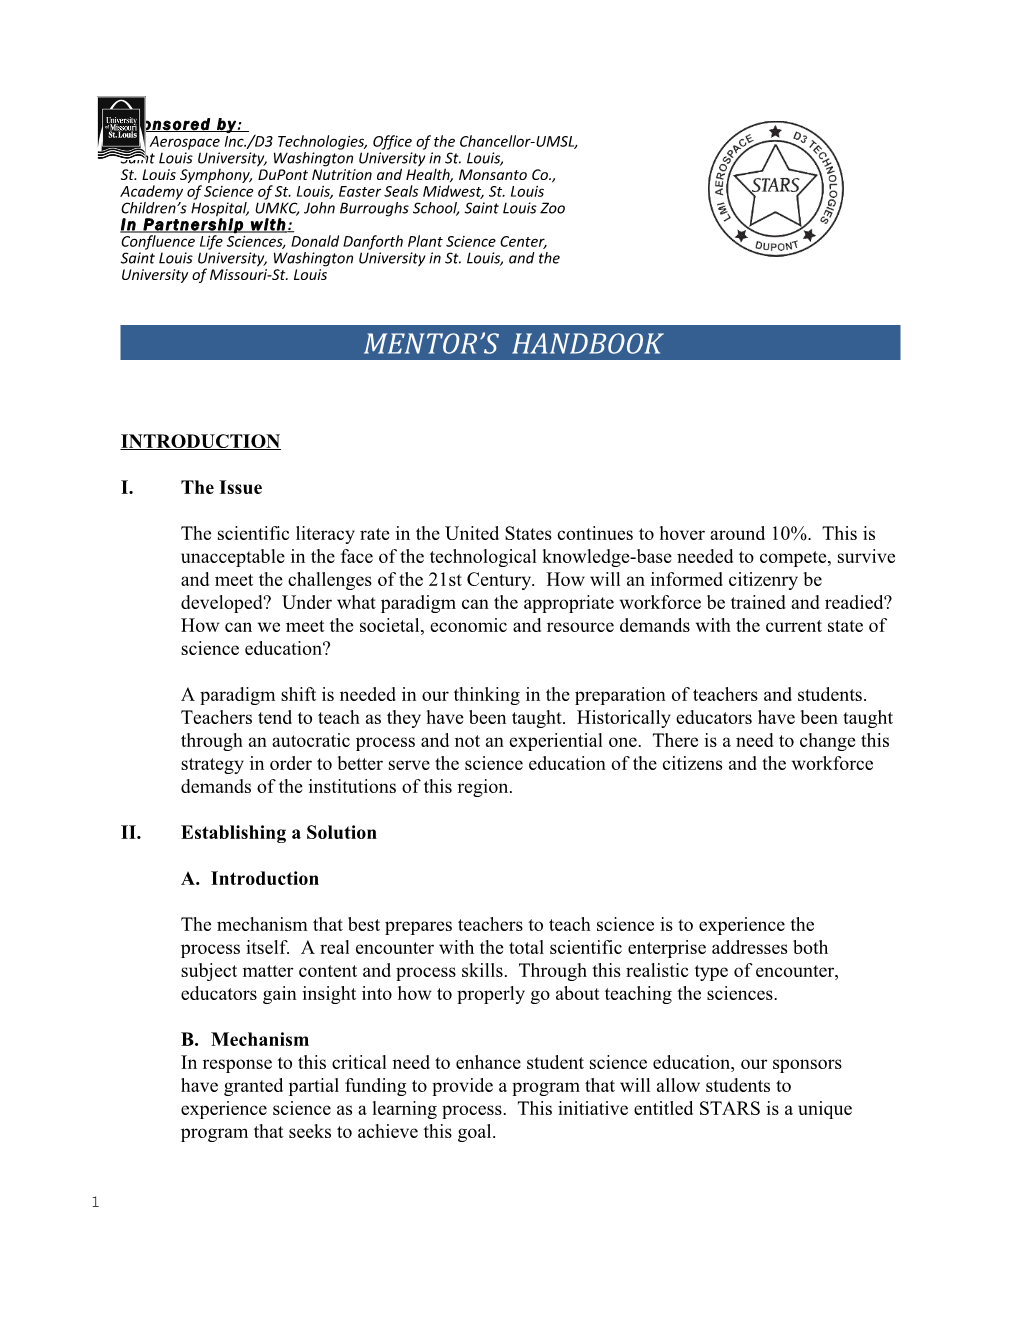 Research Mentor's Reference Handbook